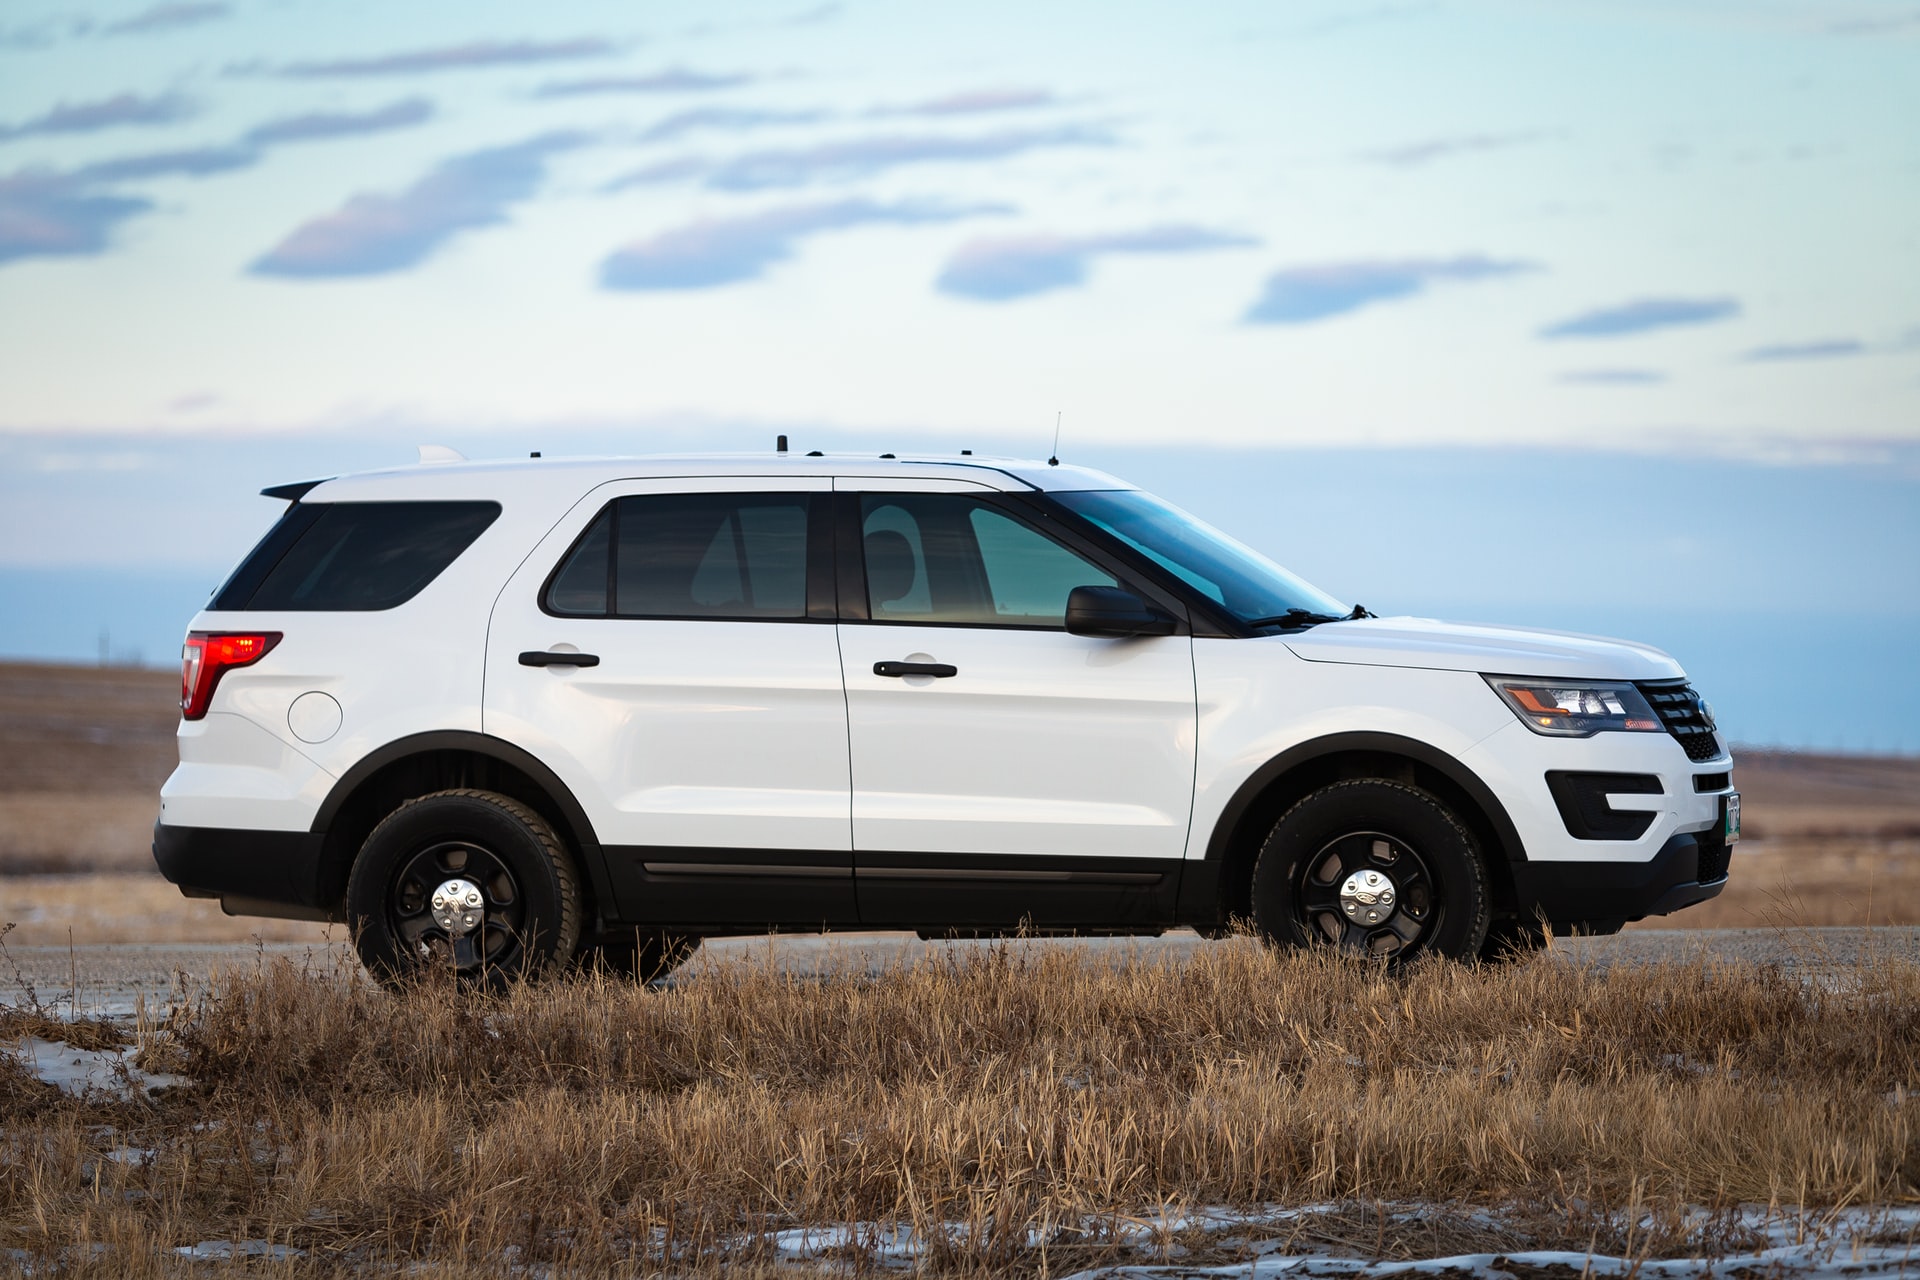 midsize-7-seater-suvs-the-new-frontier